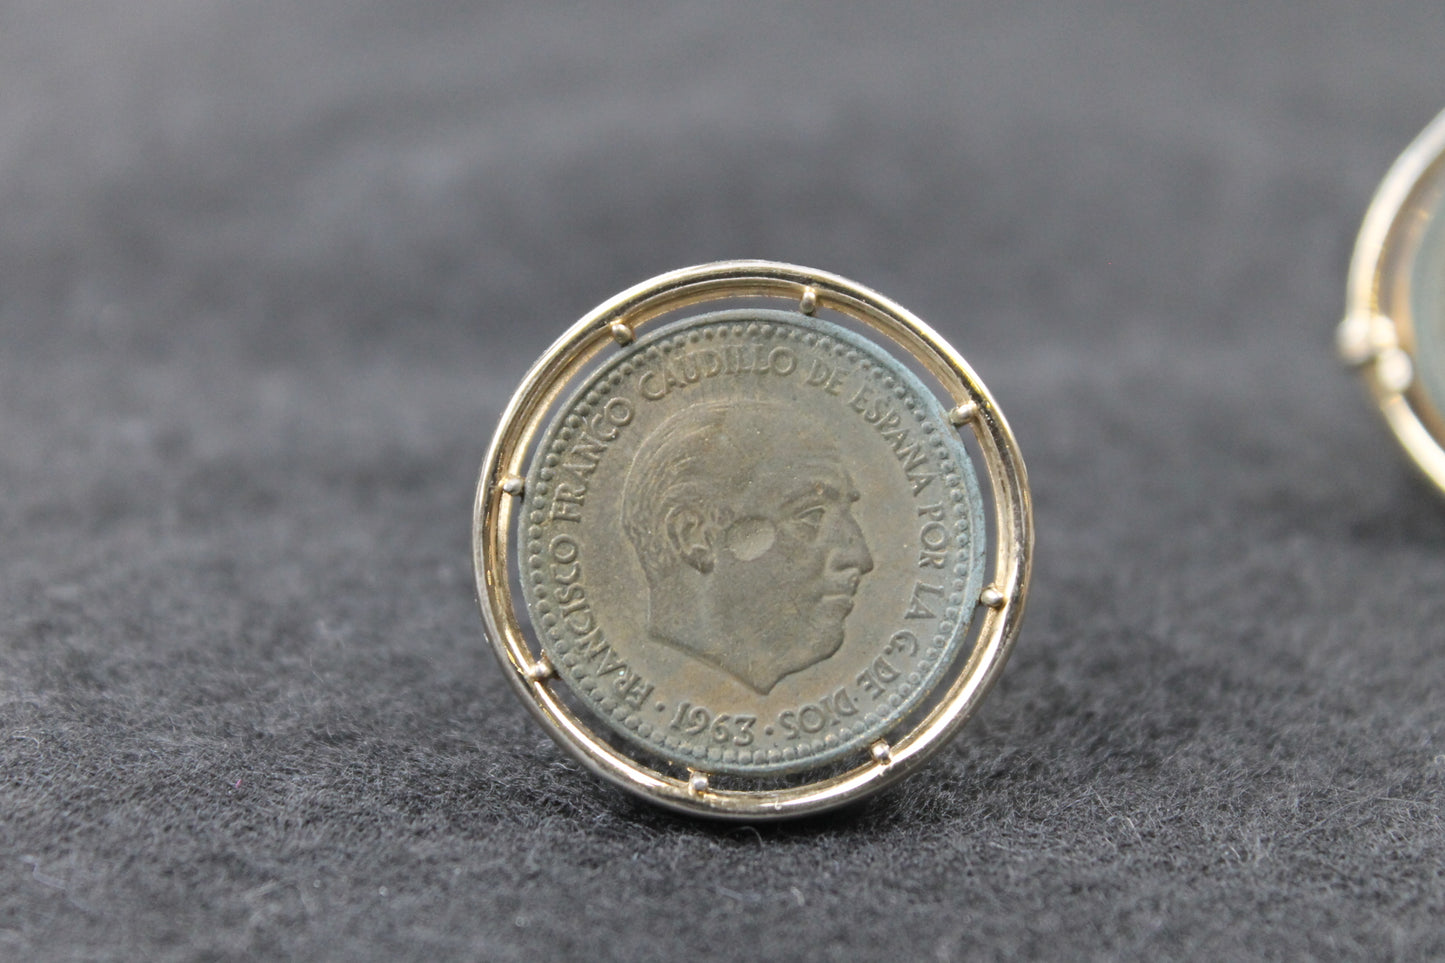 Vintage Coin Cufflinks with 1963 1 Peseta Franco Coins